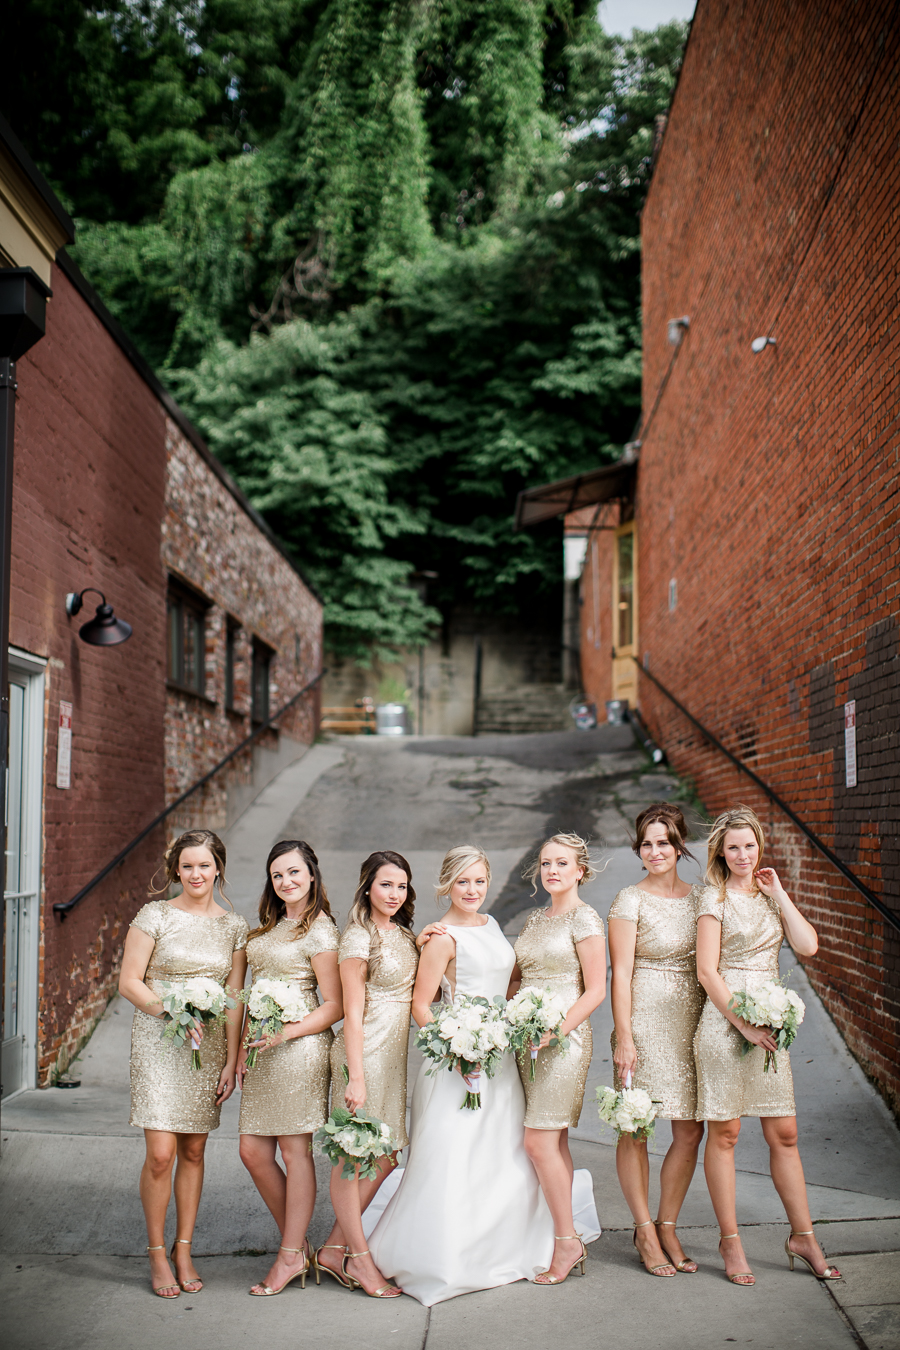 Bride with bridesmaids in alleyway at this wedding at The Standard by Knoxville Wedding Photographer, Amanda May Photos.